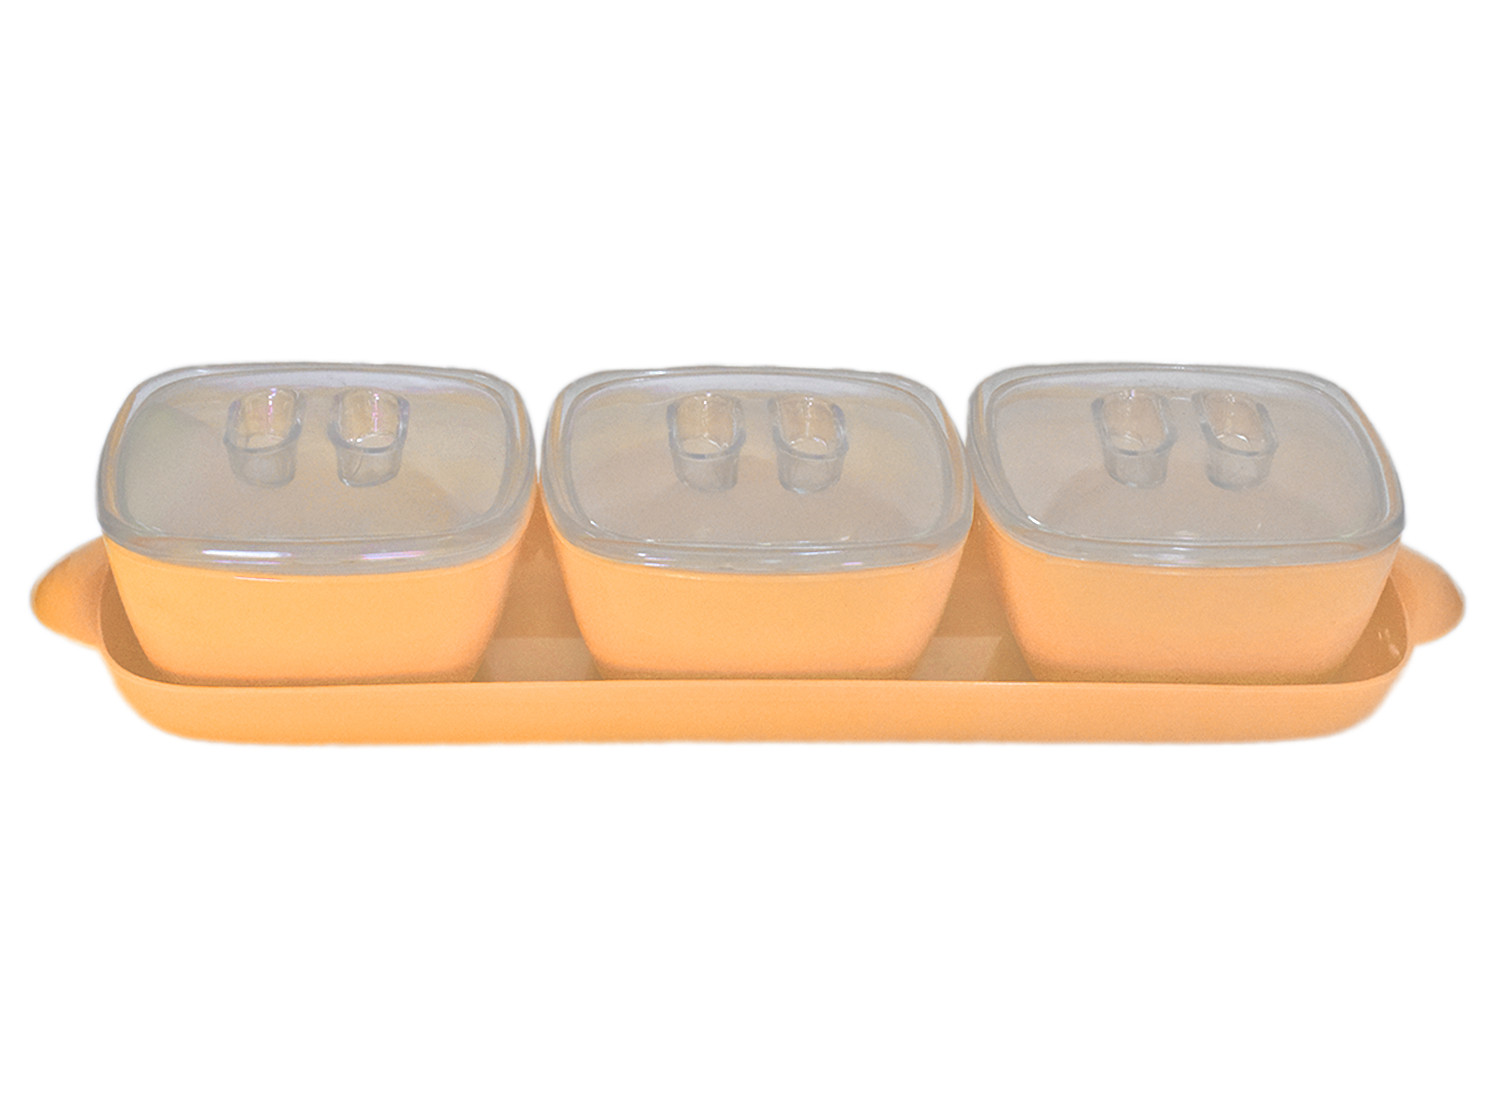 Kuber Industries Plastic 3 Bowls & 1 Tray Set For Serving & Store Dry Fruits, candies, Snacks With Silicon Rubberized Ring Lid (Autumn Orange)